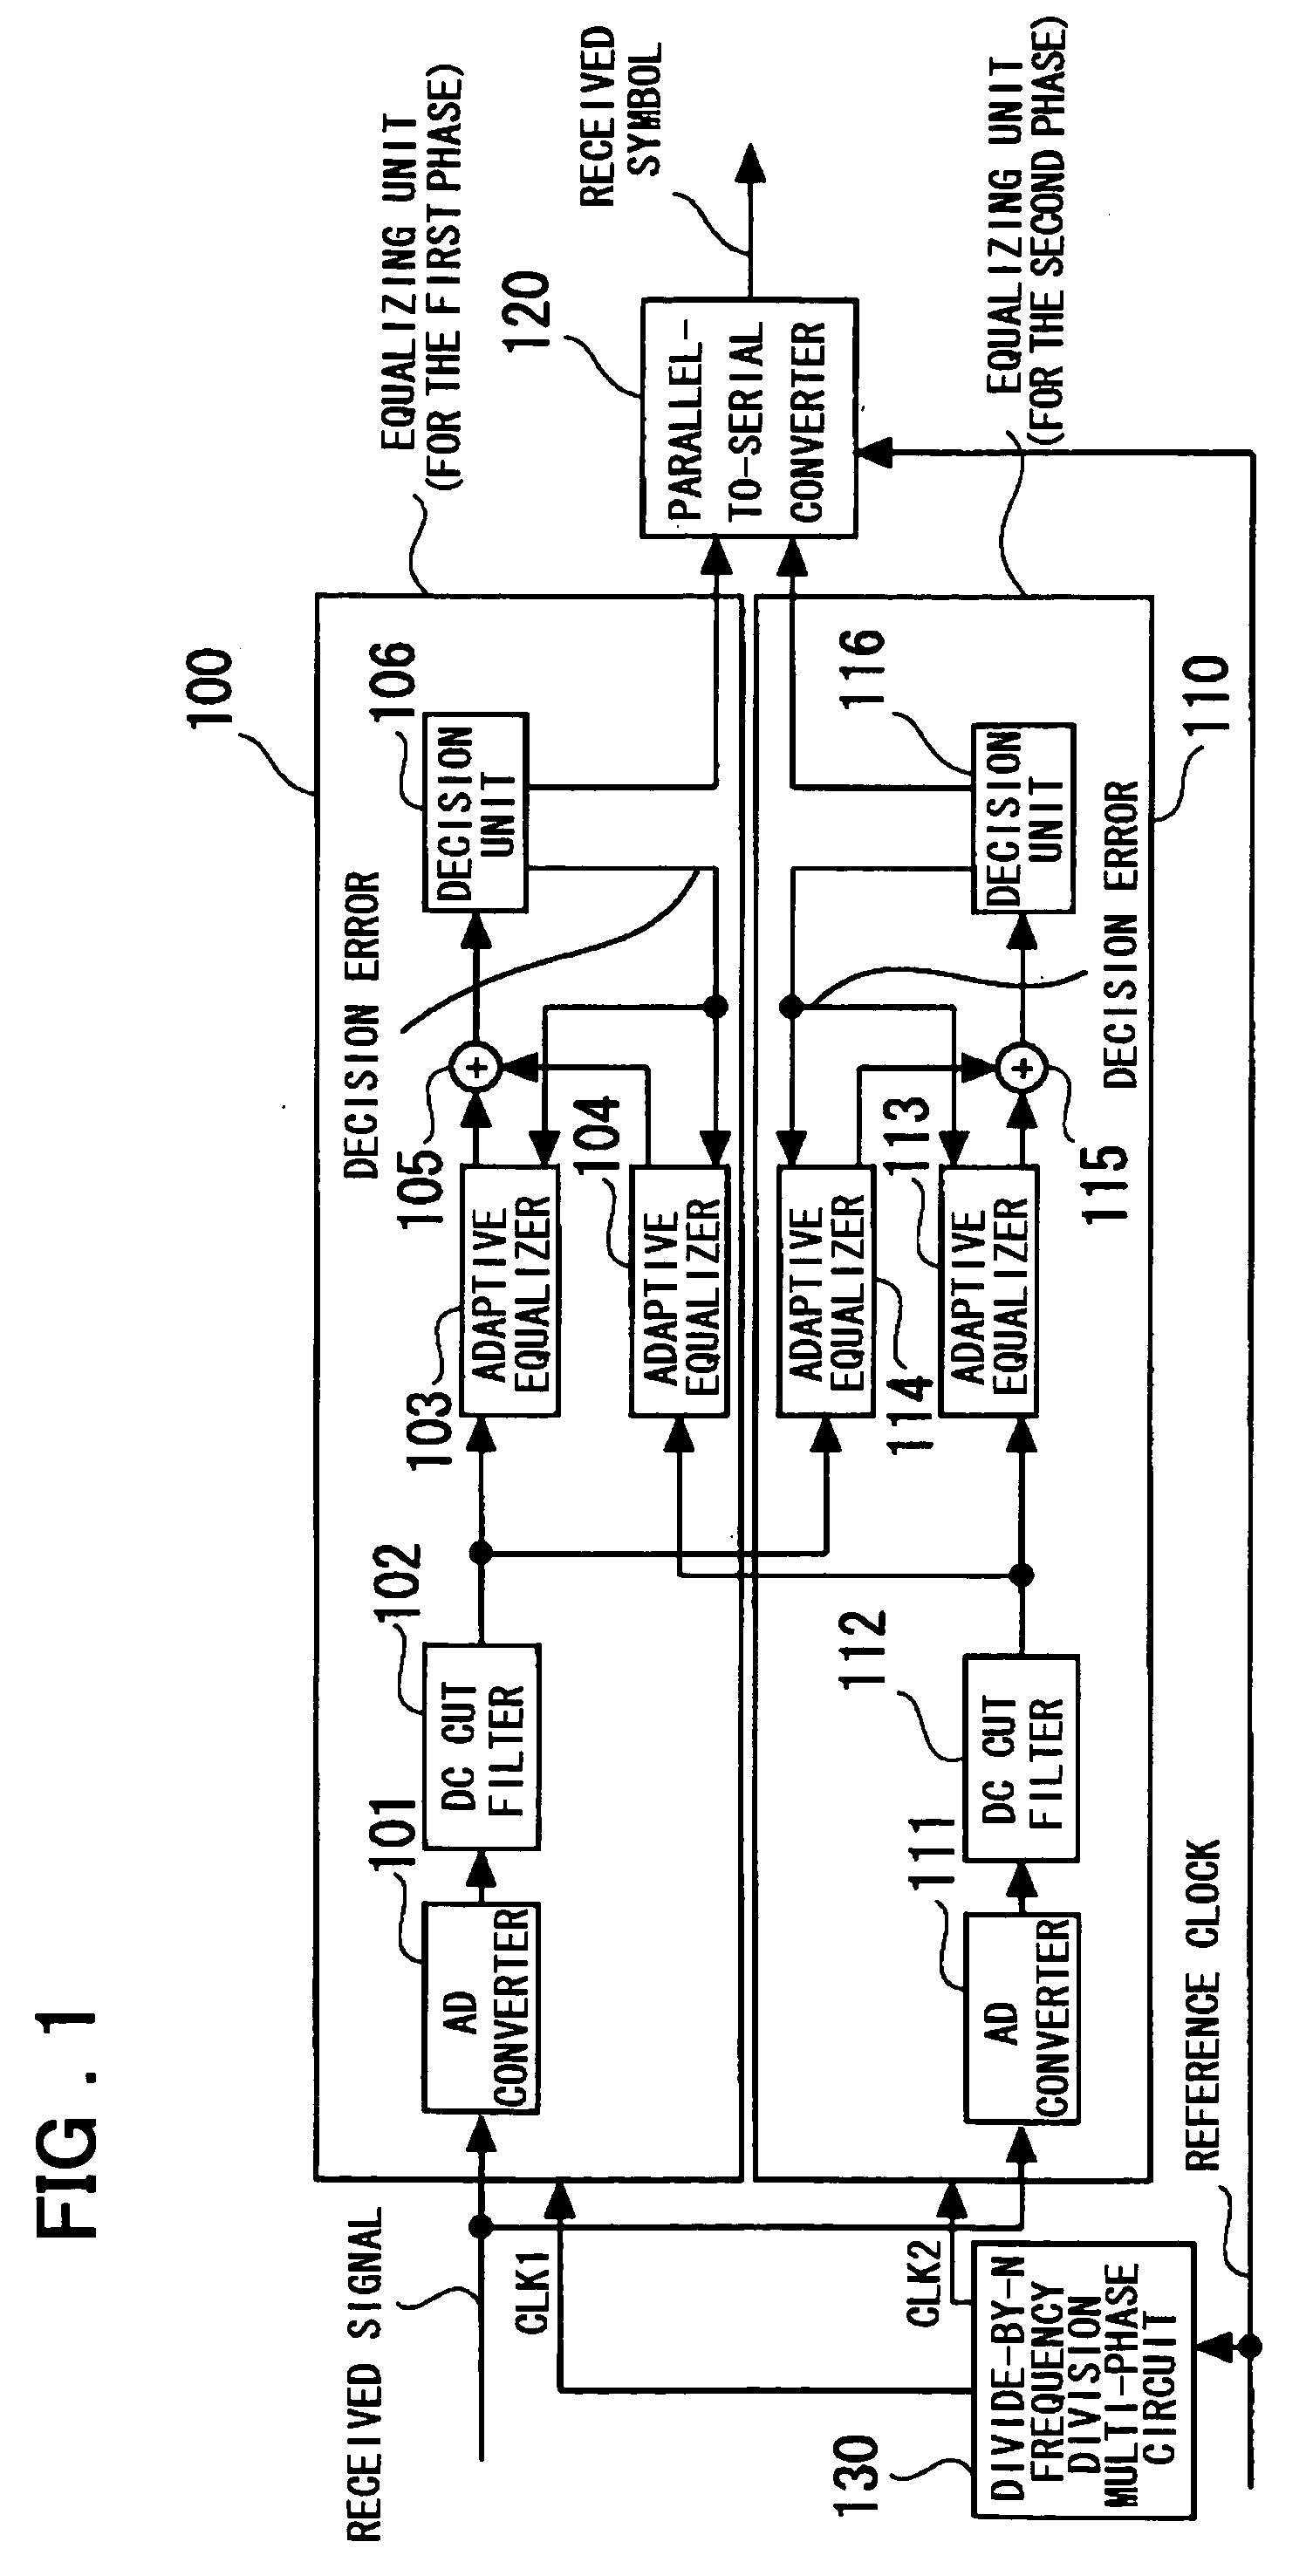 Receiving device and analog-to-digital conversion device